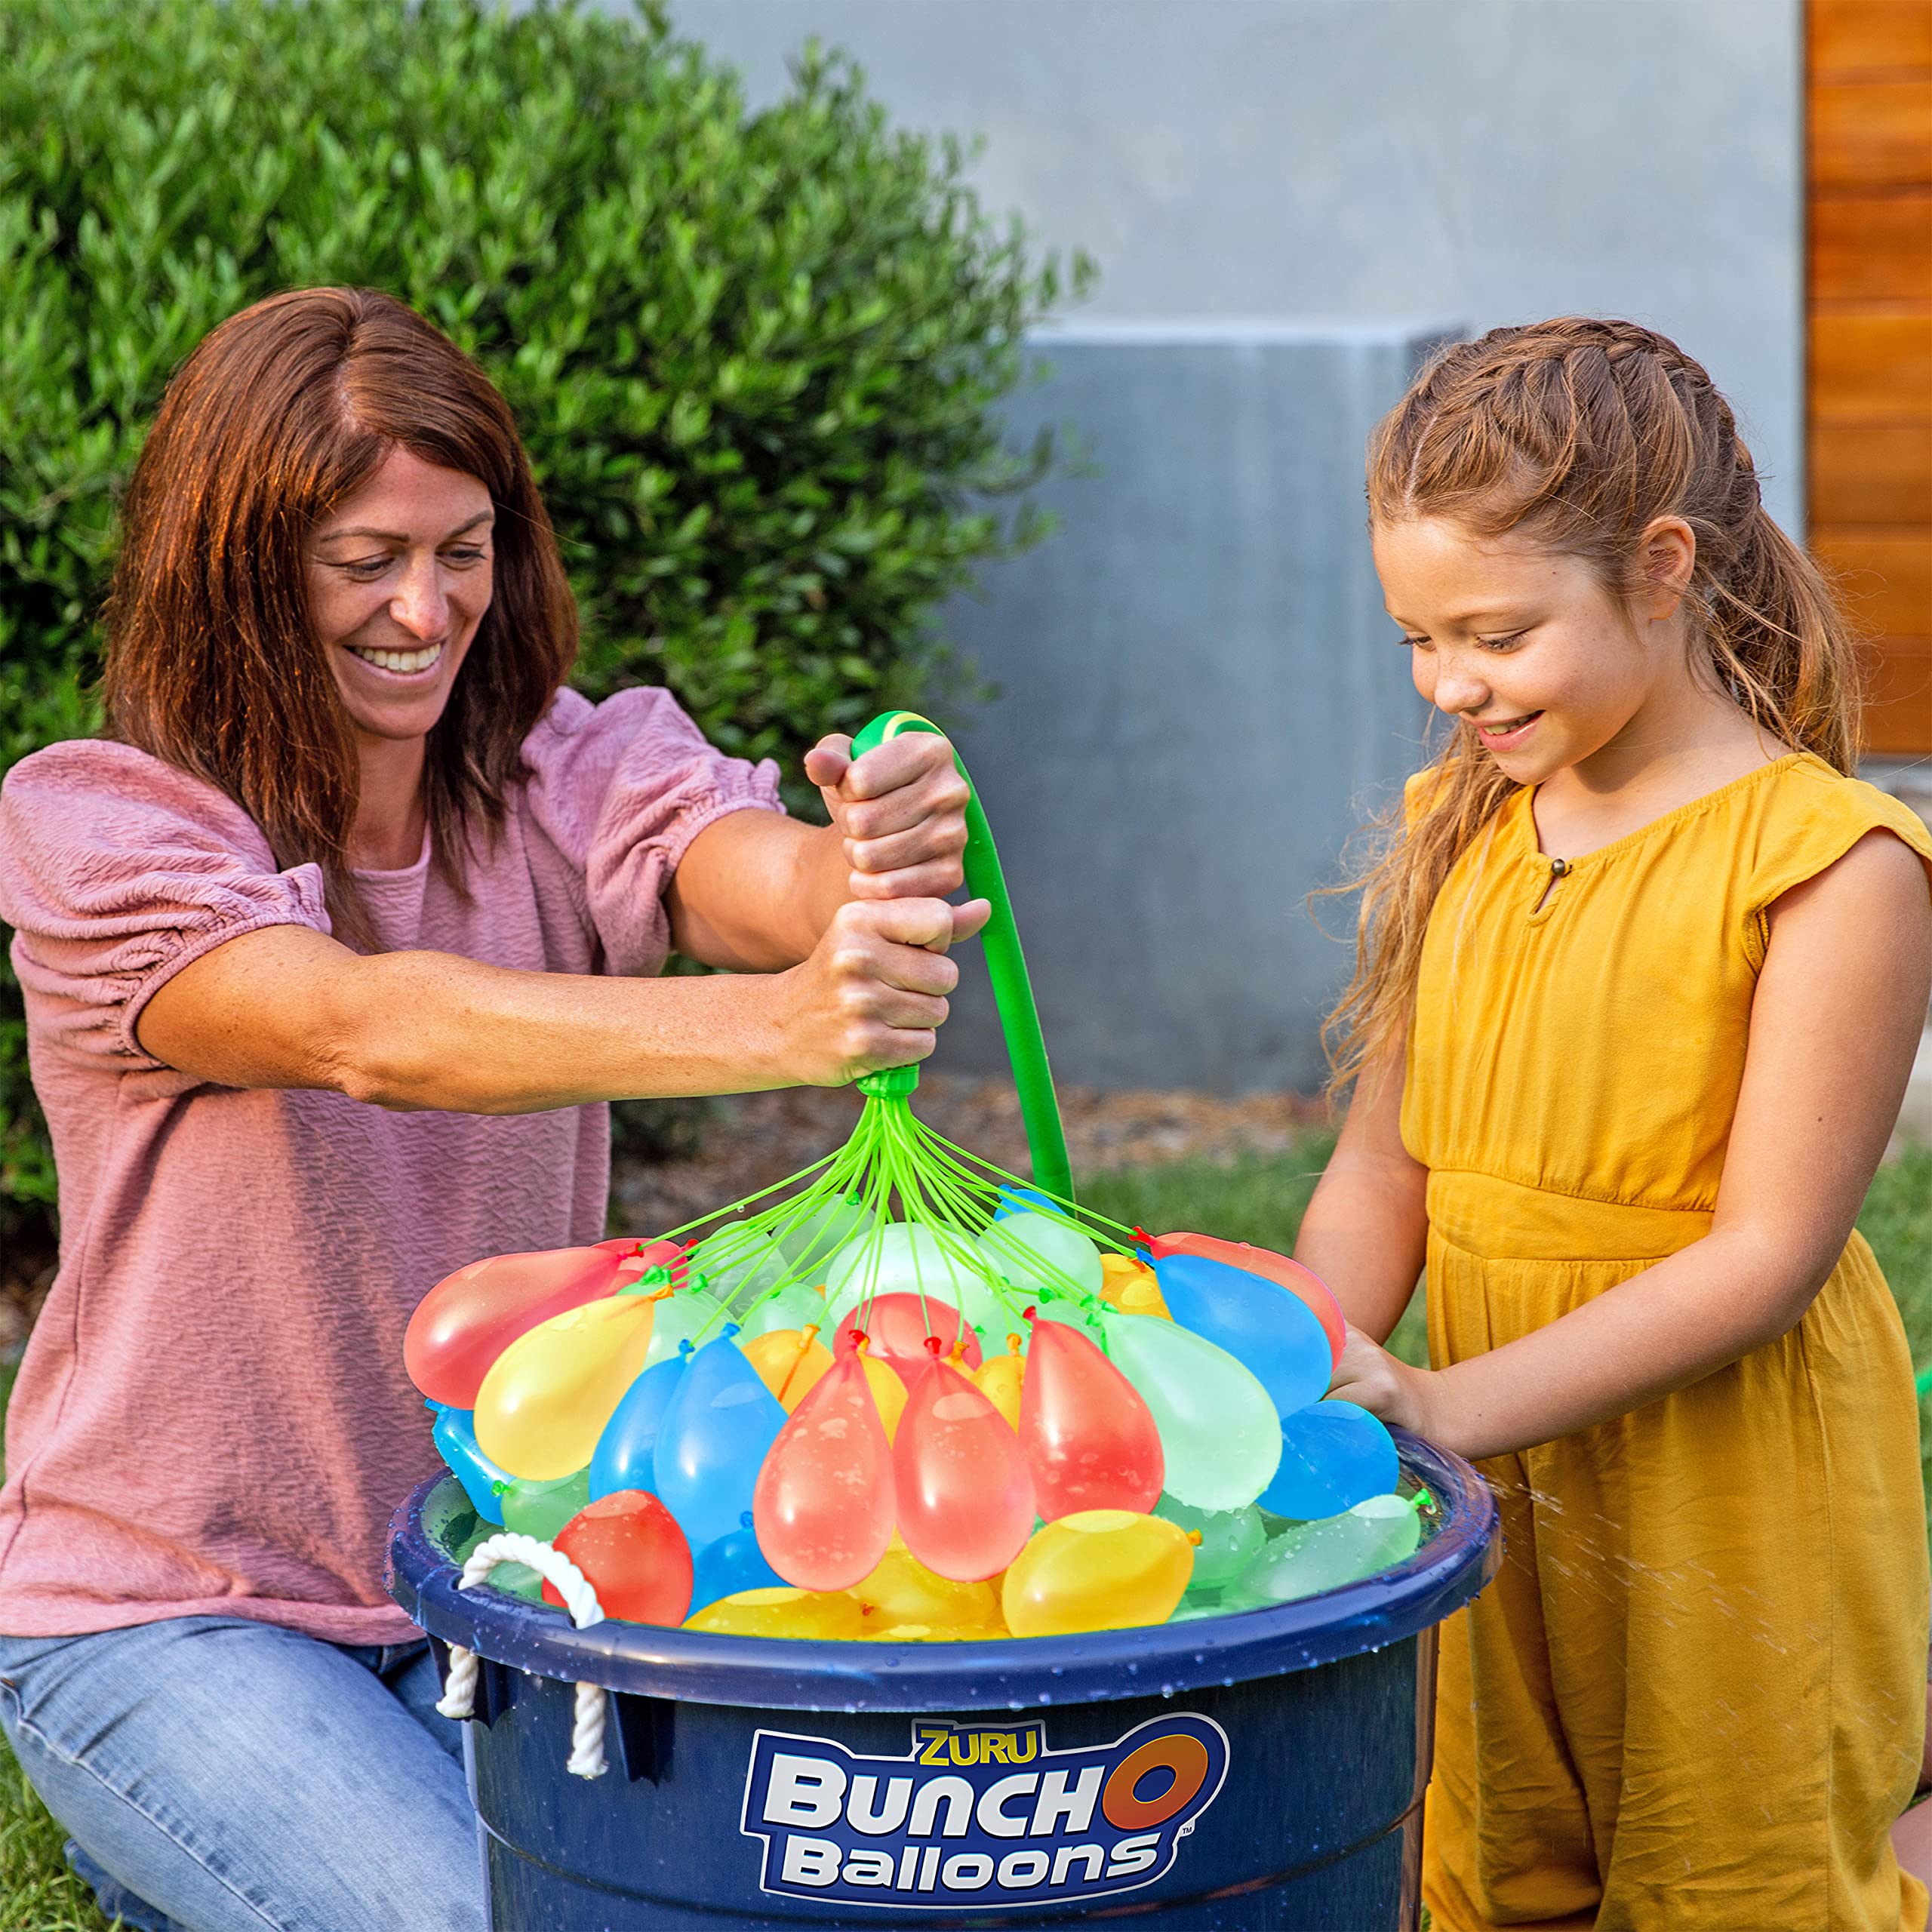 Bunch O Balloons Multi-Colored (10 Bunches) by ZURU, 350+ Rapid-Filling Self-Sealing Instant Water Balloons for Outdoor Family, Children Summer Fun - Total (100 Balloons) Colors May Vary